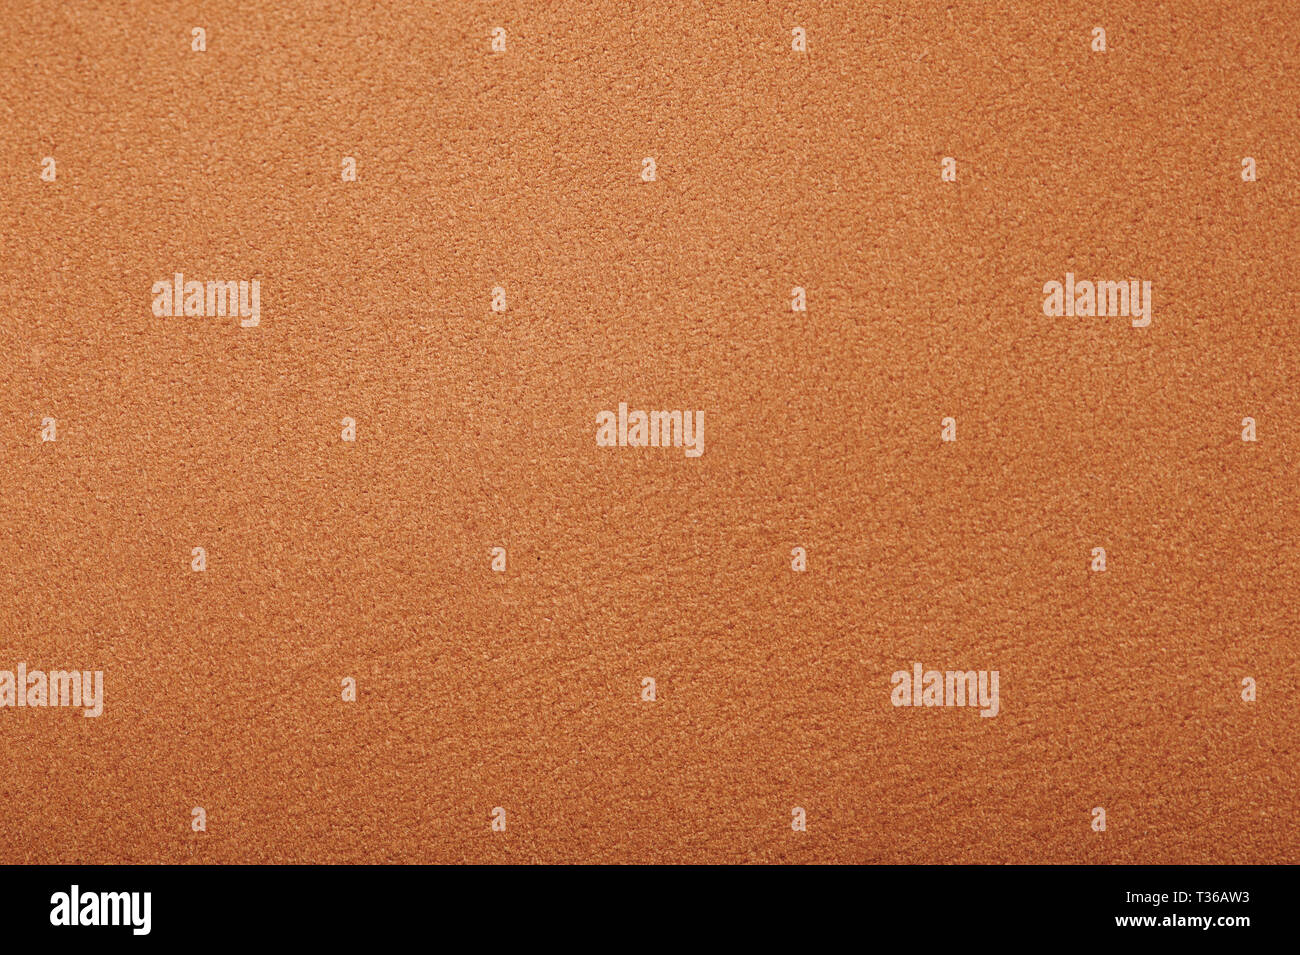 Back view of brown leather texture background Stock Photo